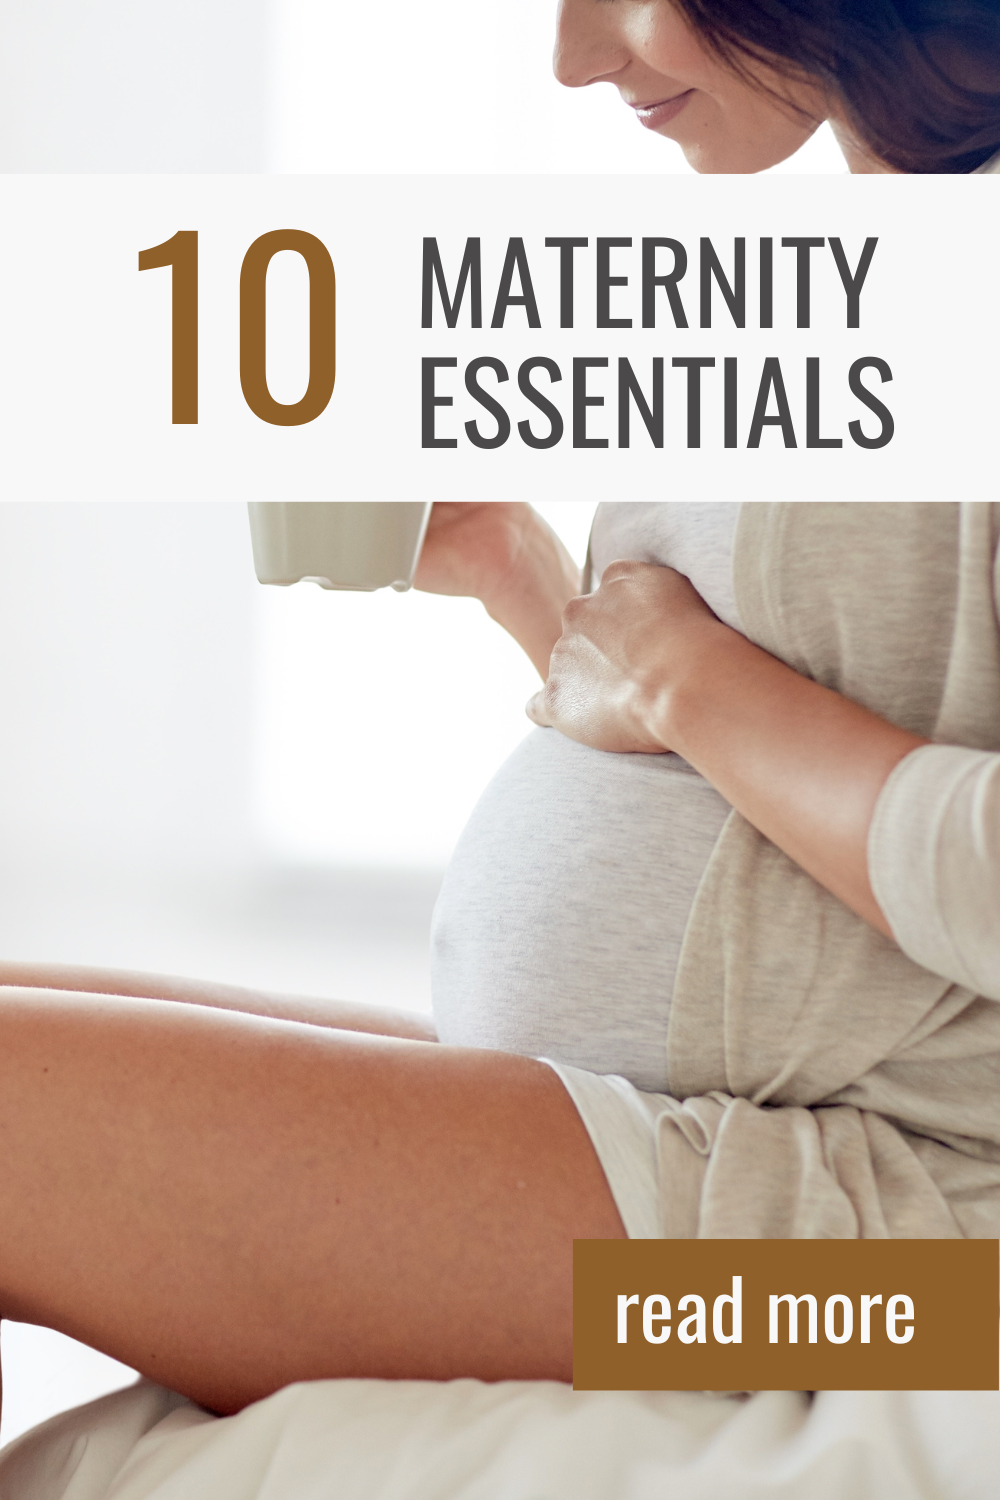 How to Buy Maternity Clothes